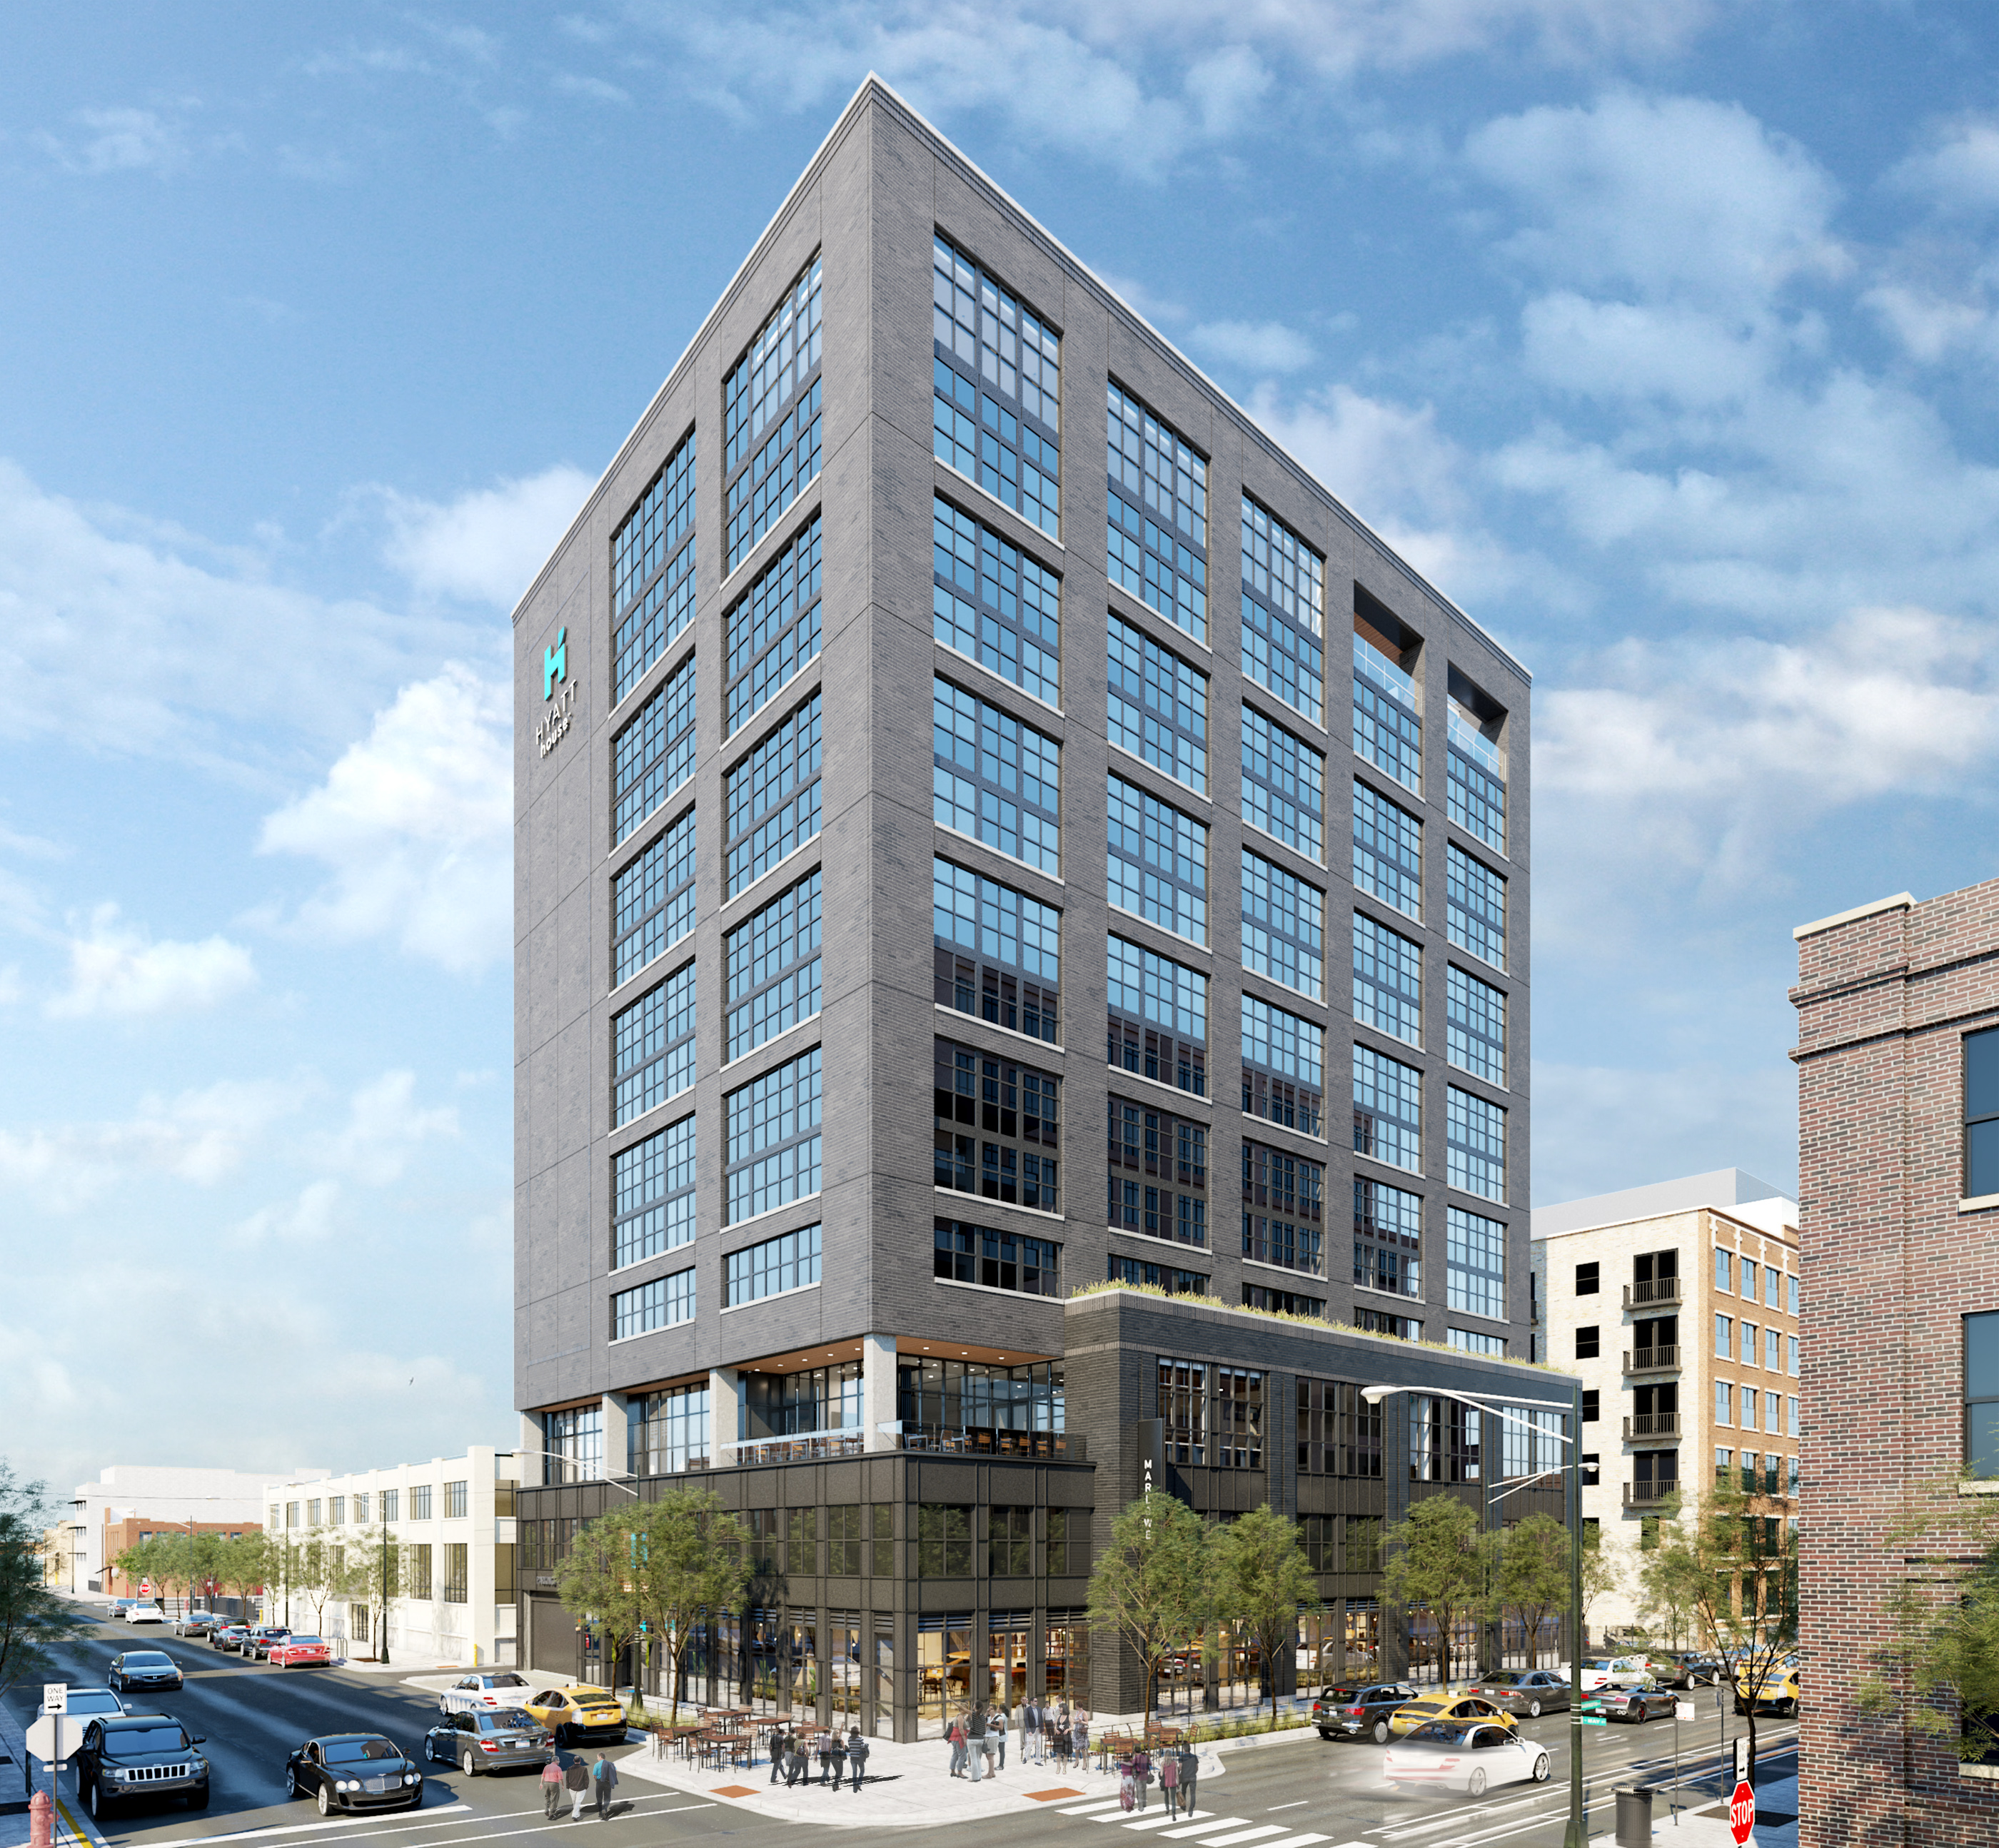 Hyatt House Chicago Fulton Market District will be McKibbon Hospitalitys first management property in the Fulton Market Di